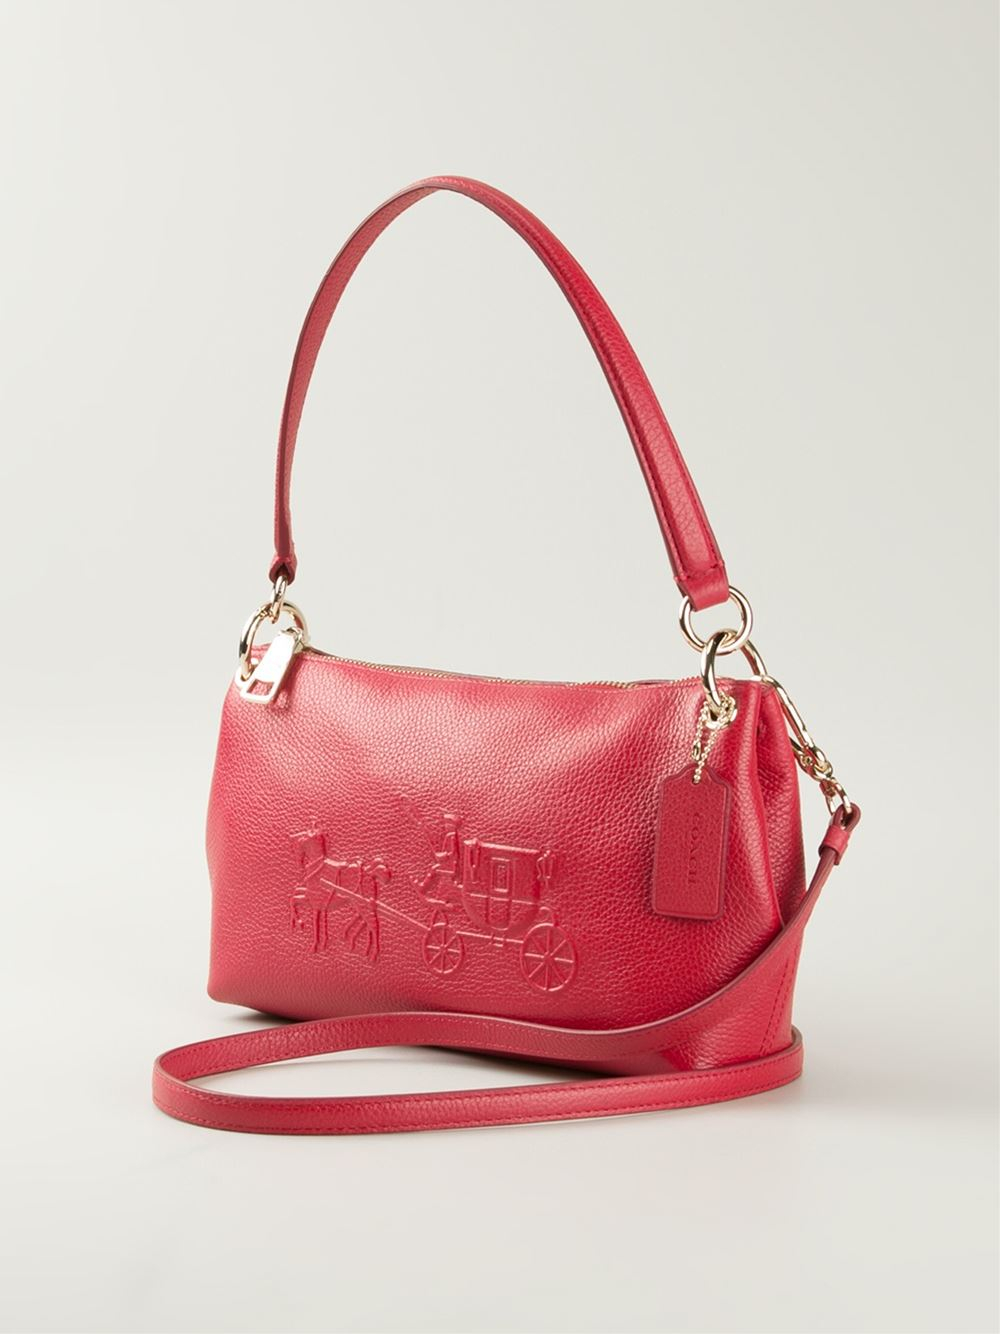 COACH Charley Leather Cross-Body Bag in Red - Lyst